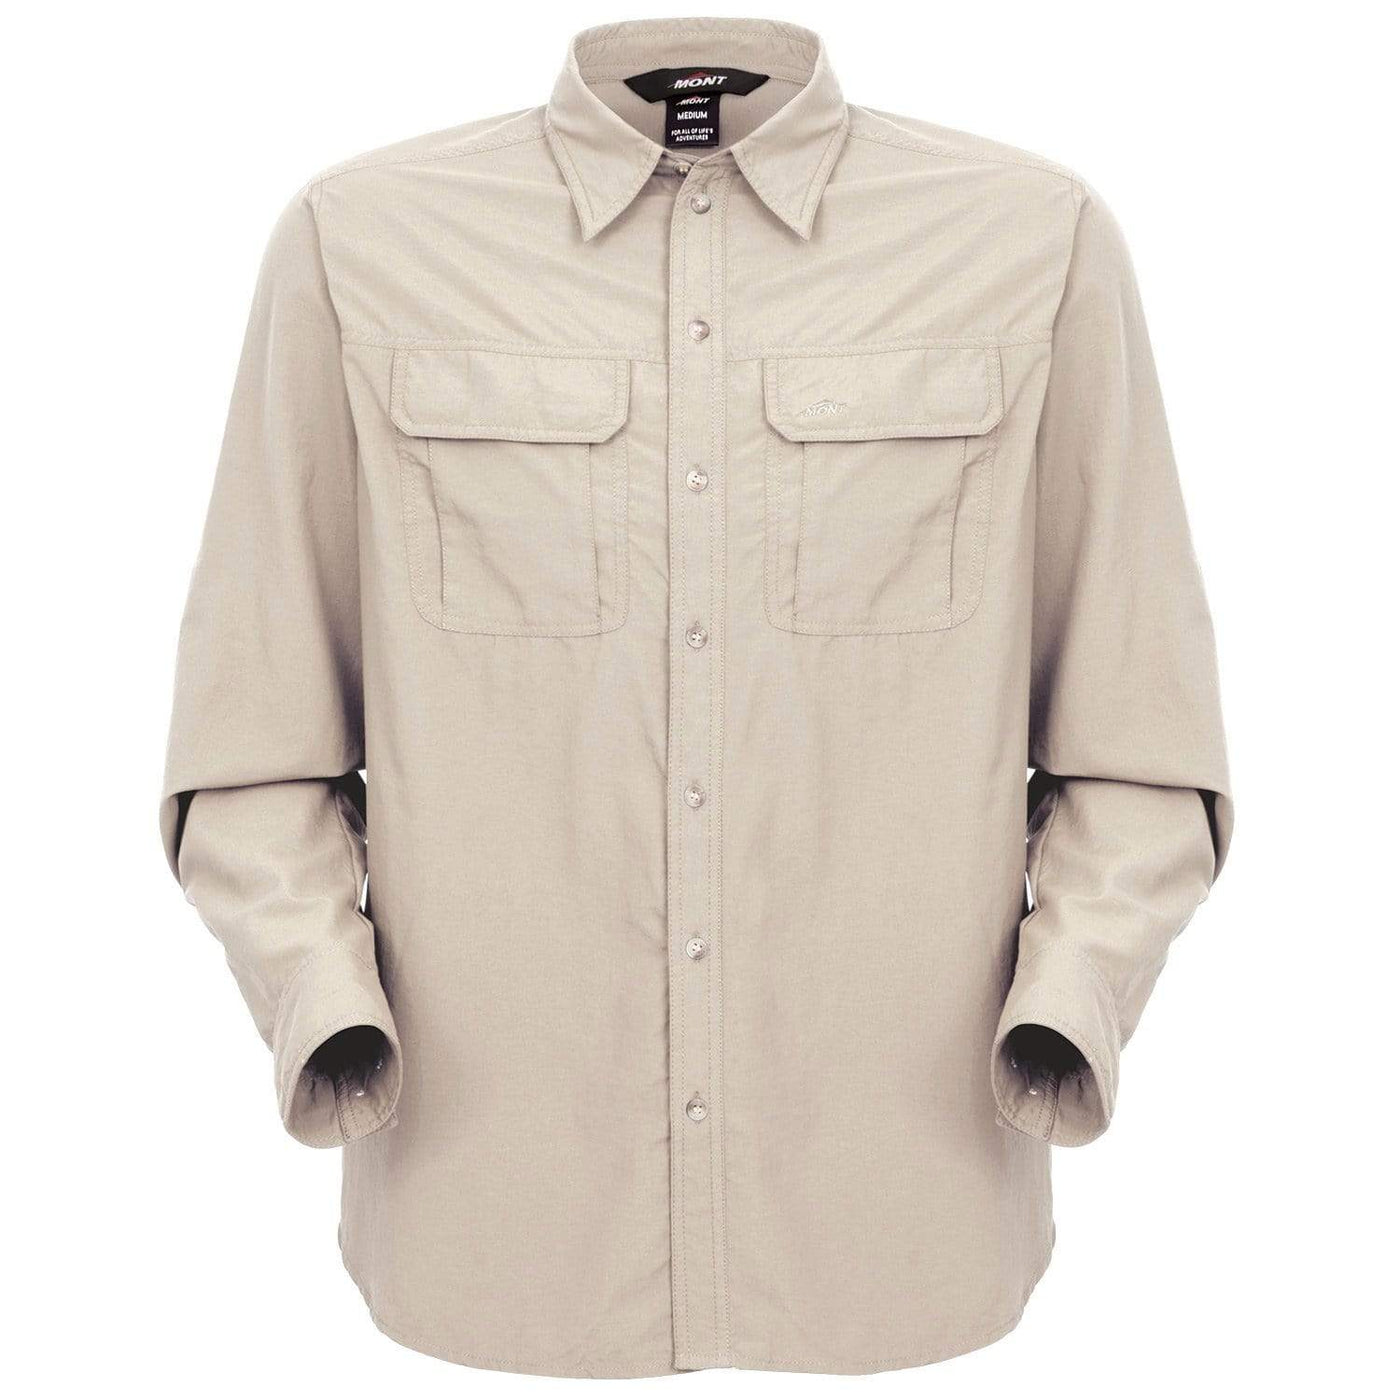 Men's Outdoor Shirts | Quick-Dry Anti-Odour Outdoor Shirts for Men ...